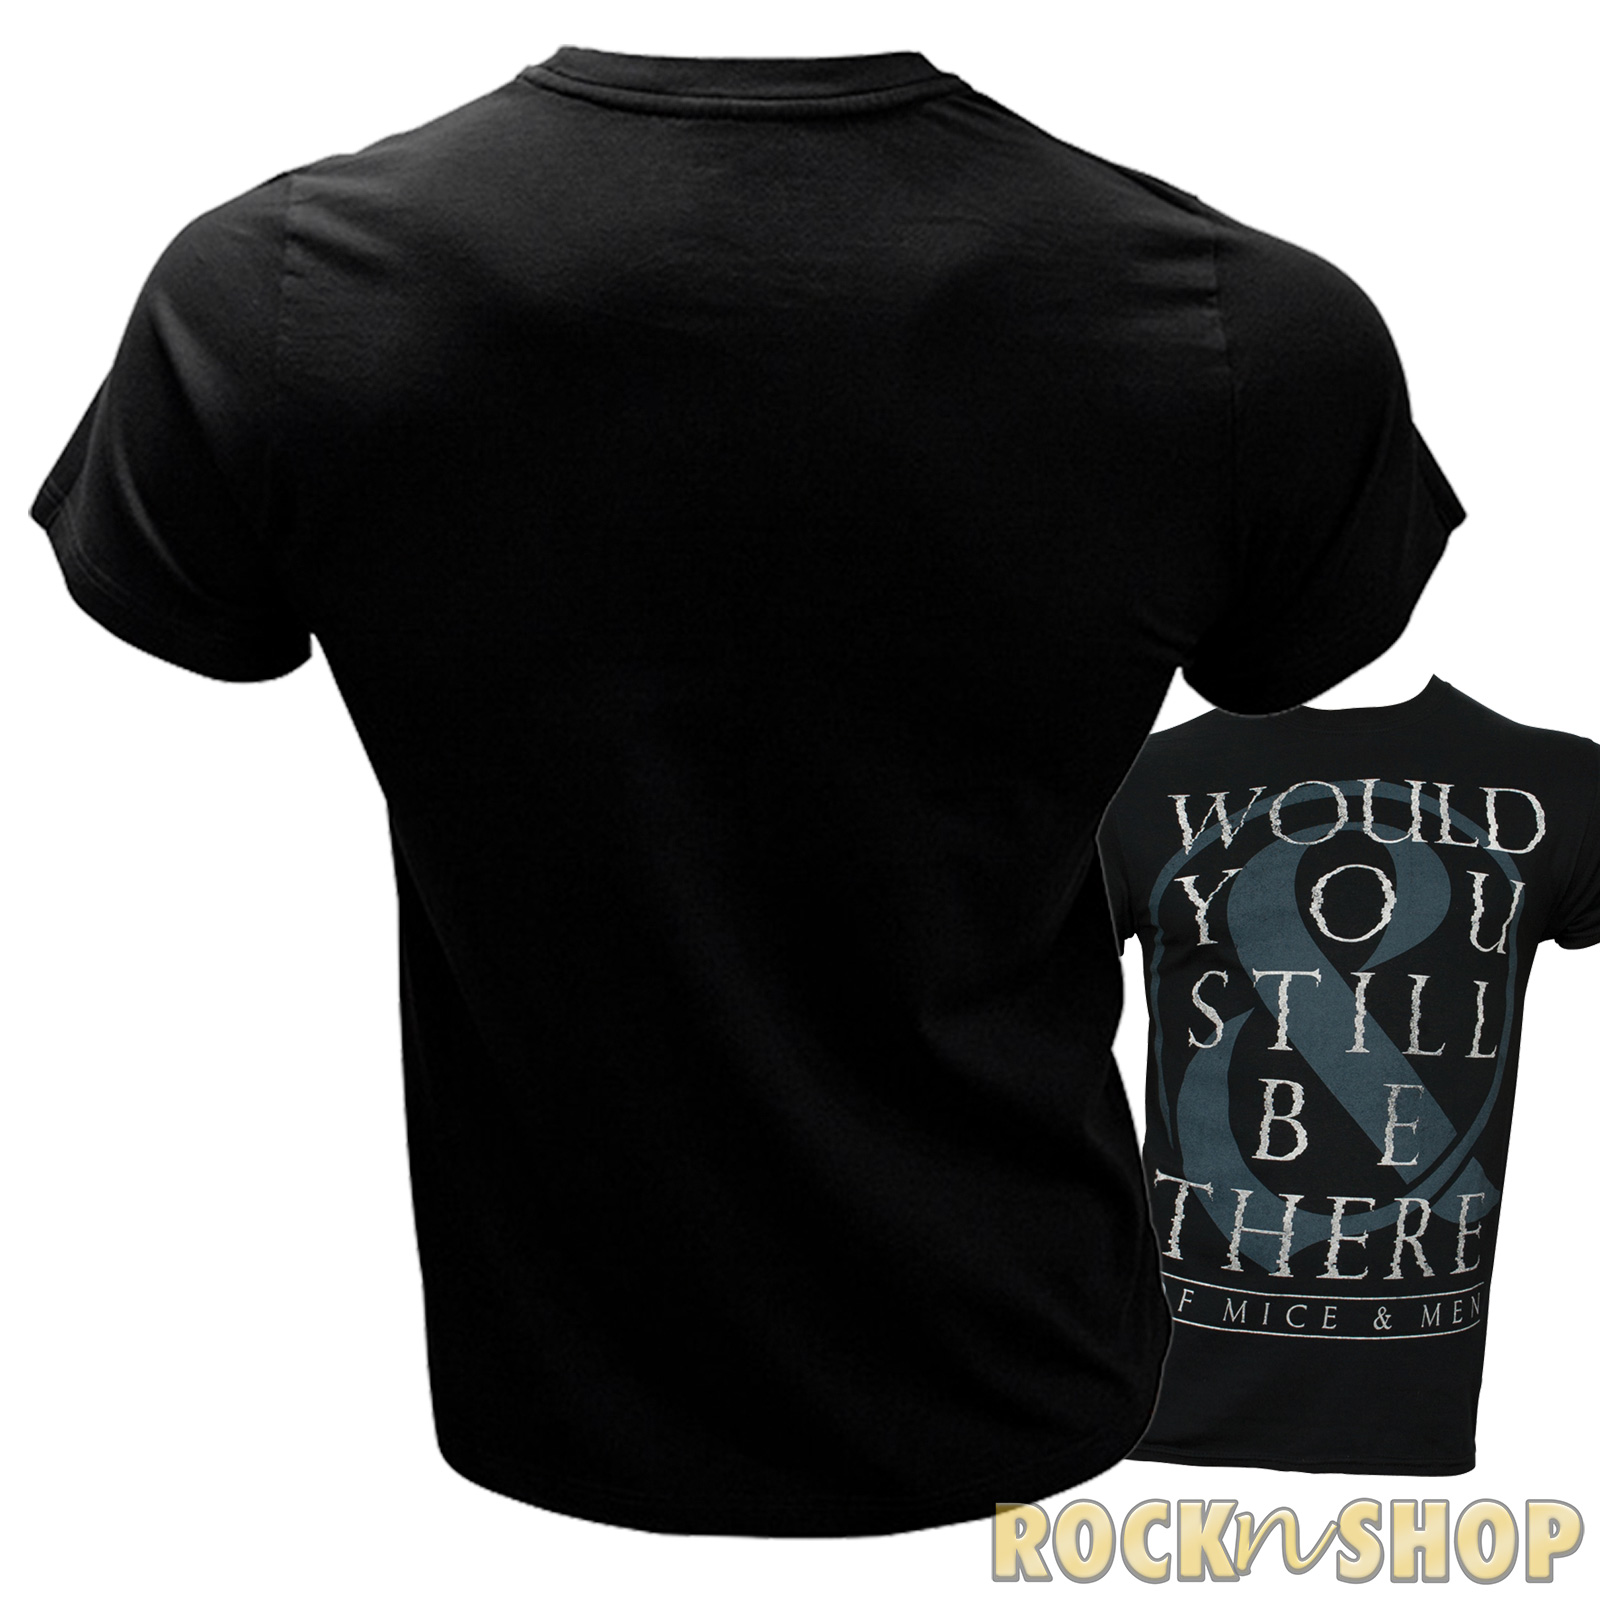 Of Mice & Men - T-Shirt Would You Still Be There - schwarz